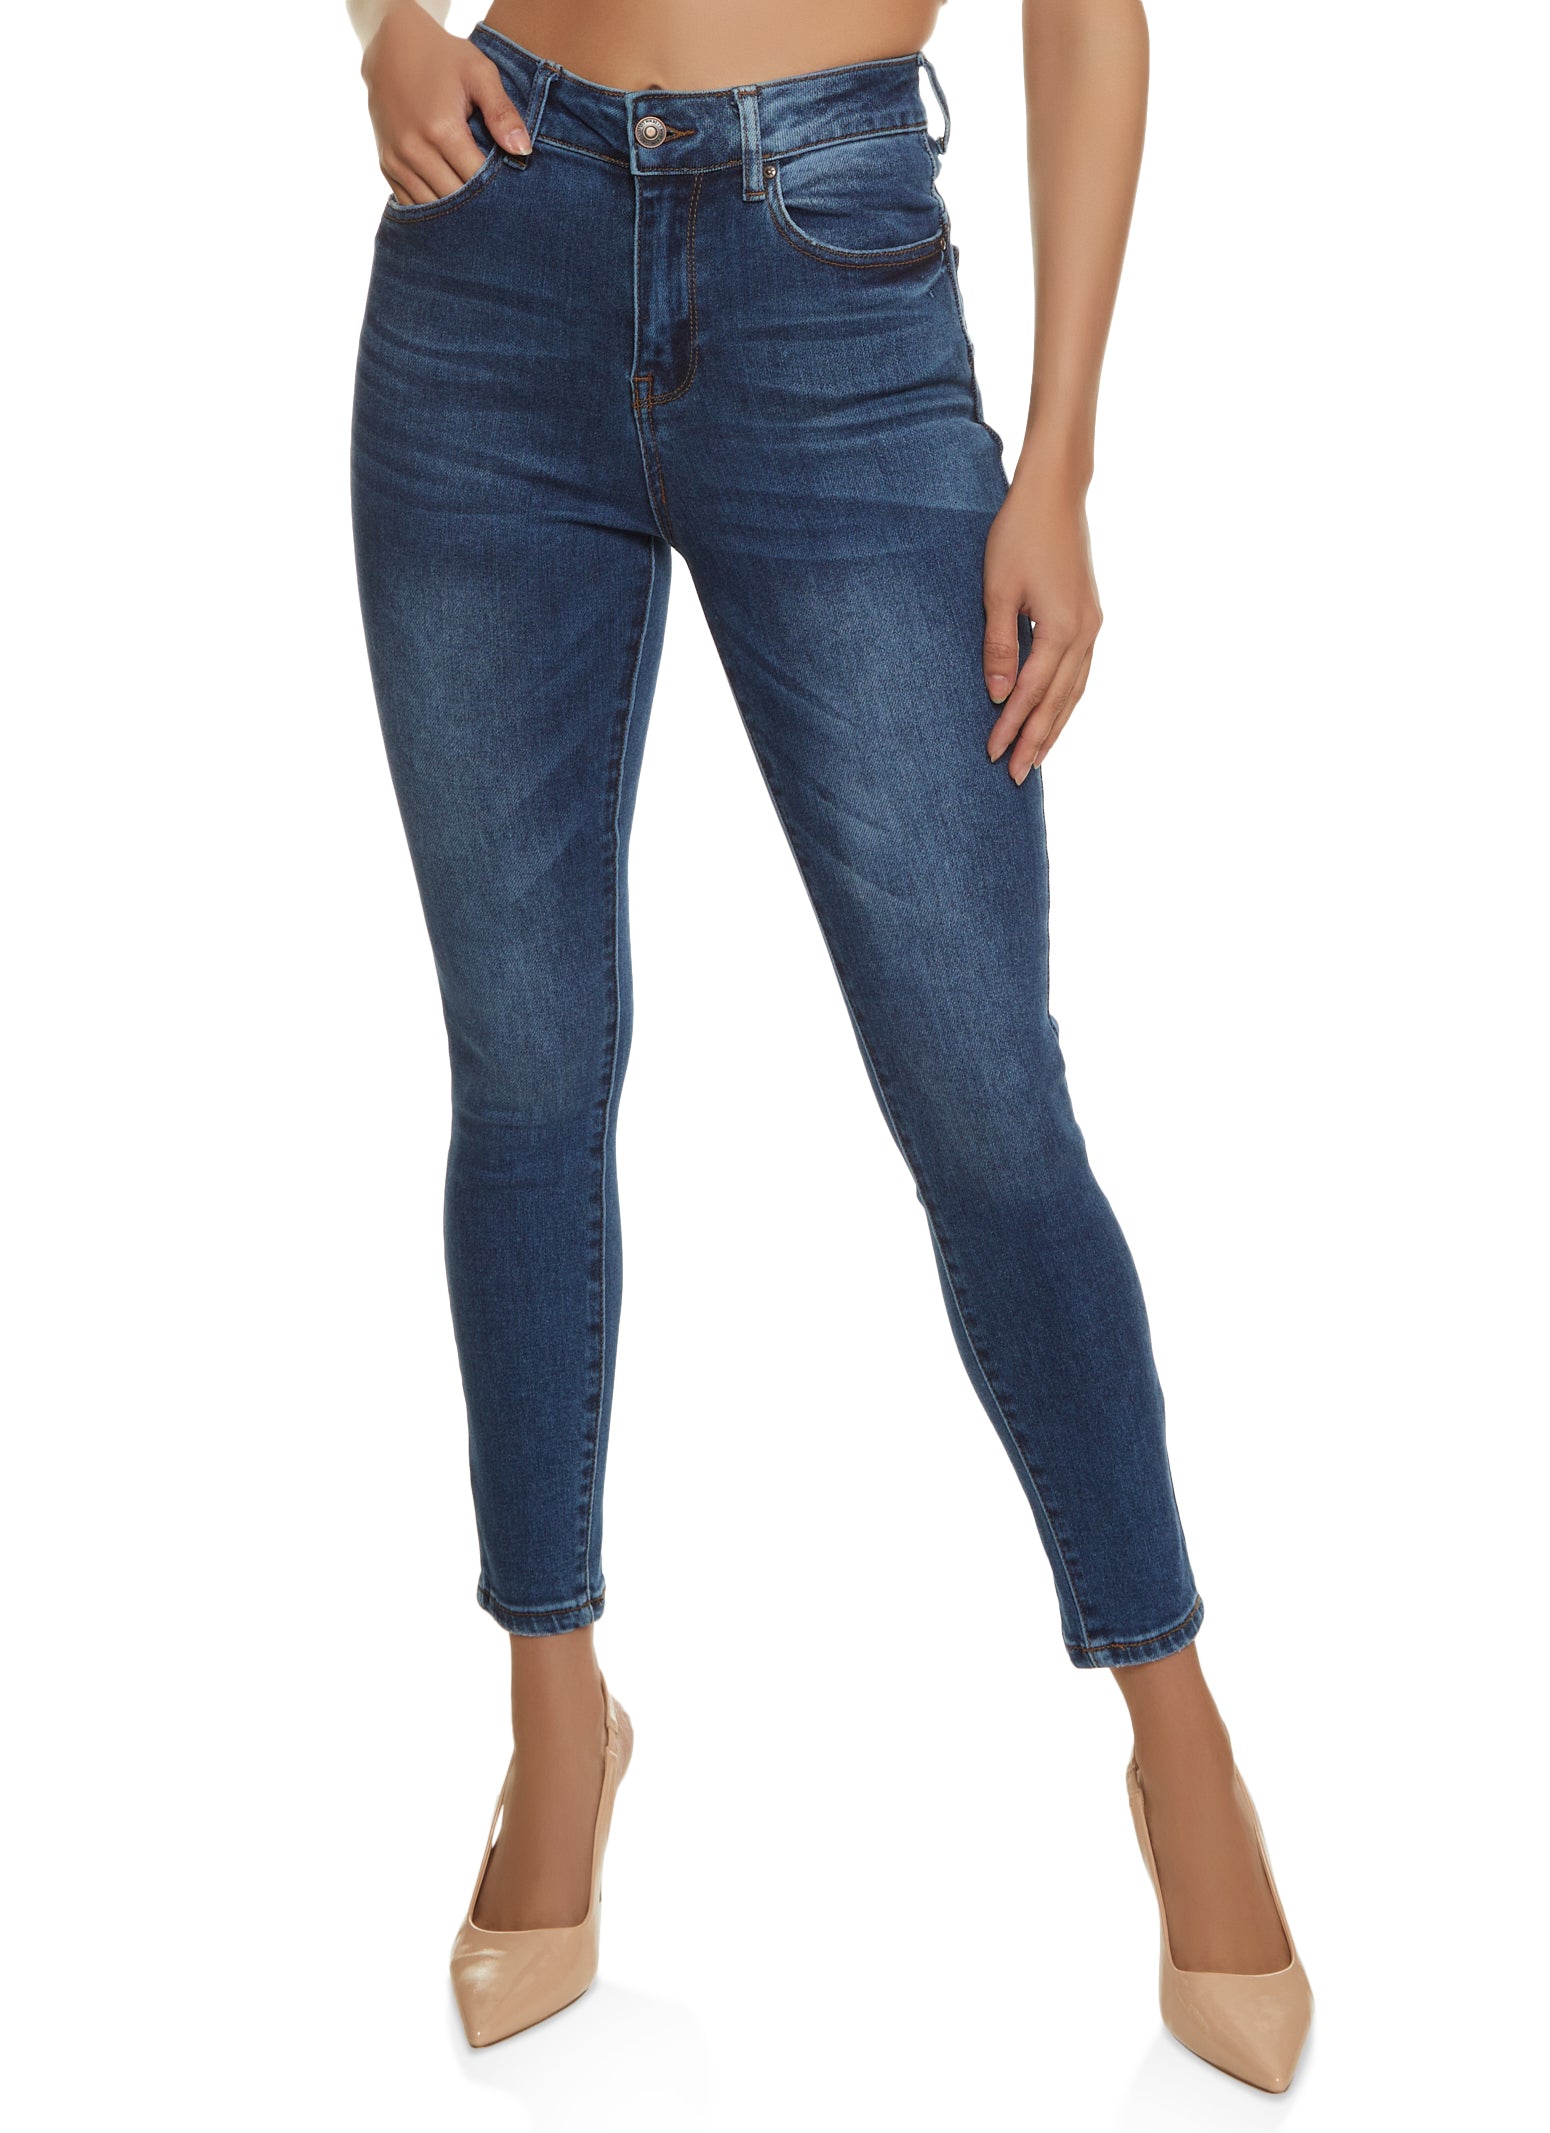 WAX Cropped High Rise Skinny Jeans